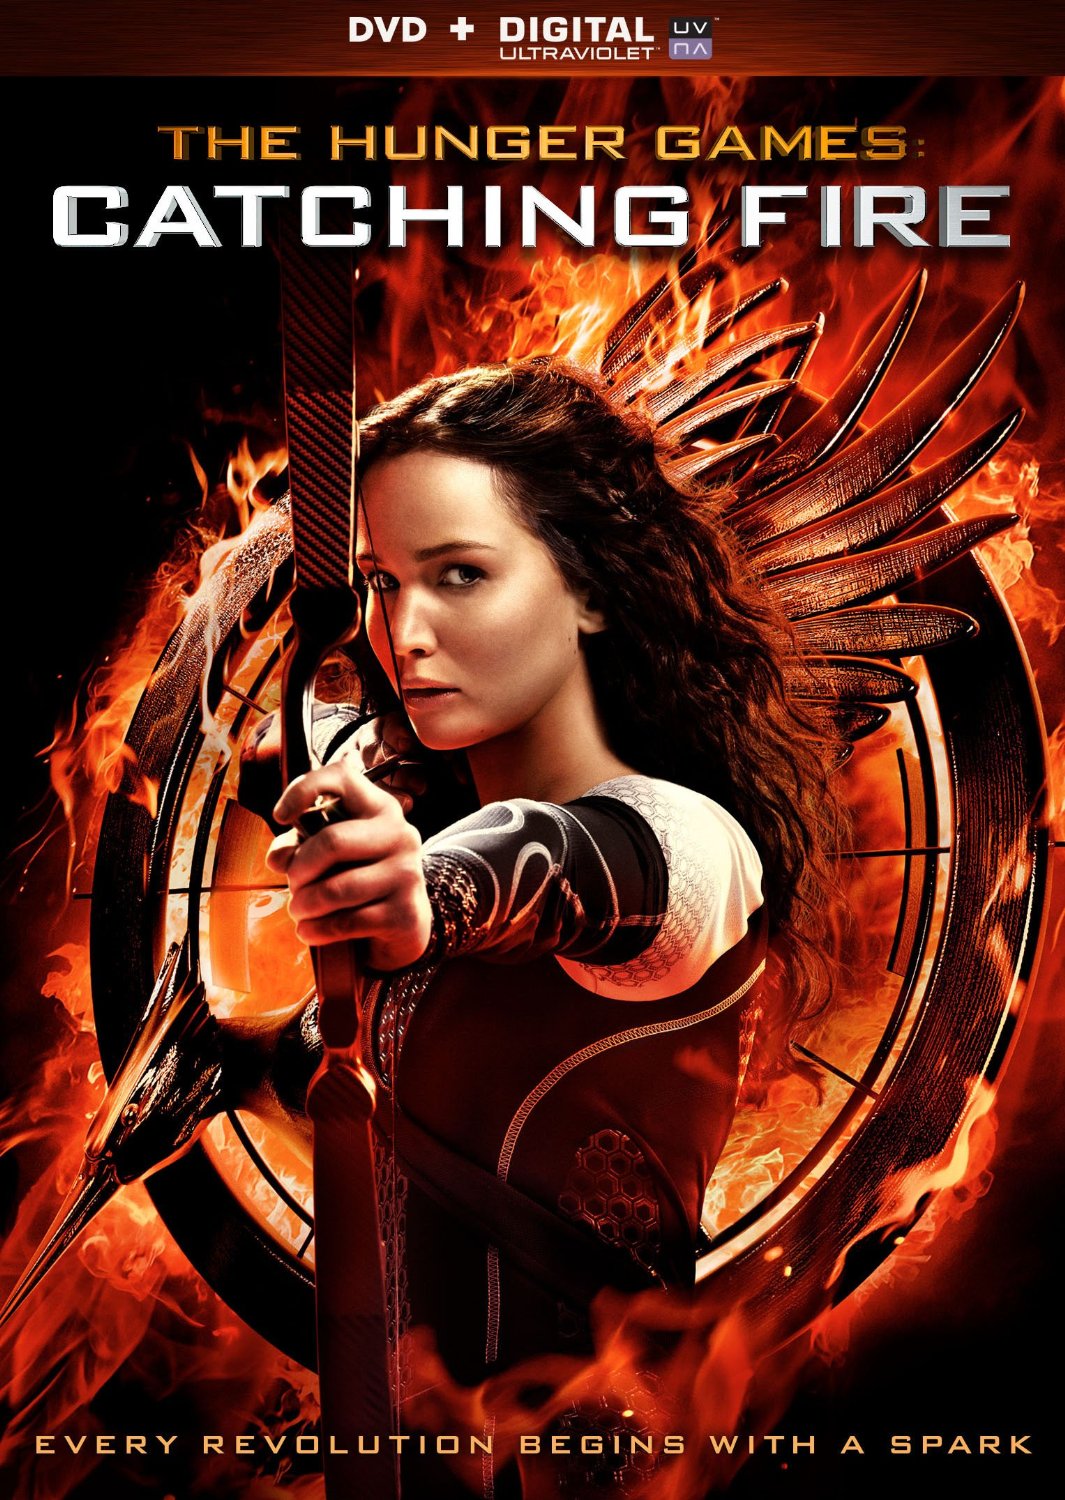 The Hunger Games: Catching Fire DVD Combo Pack Only $17.99